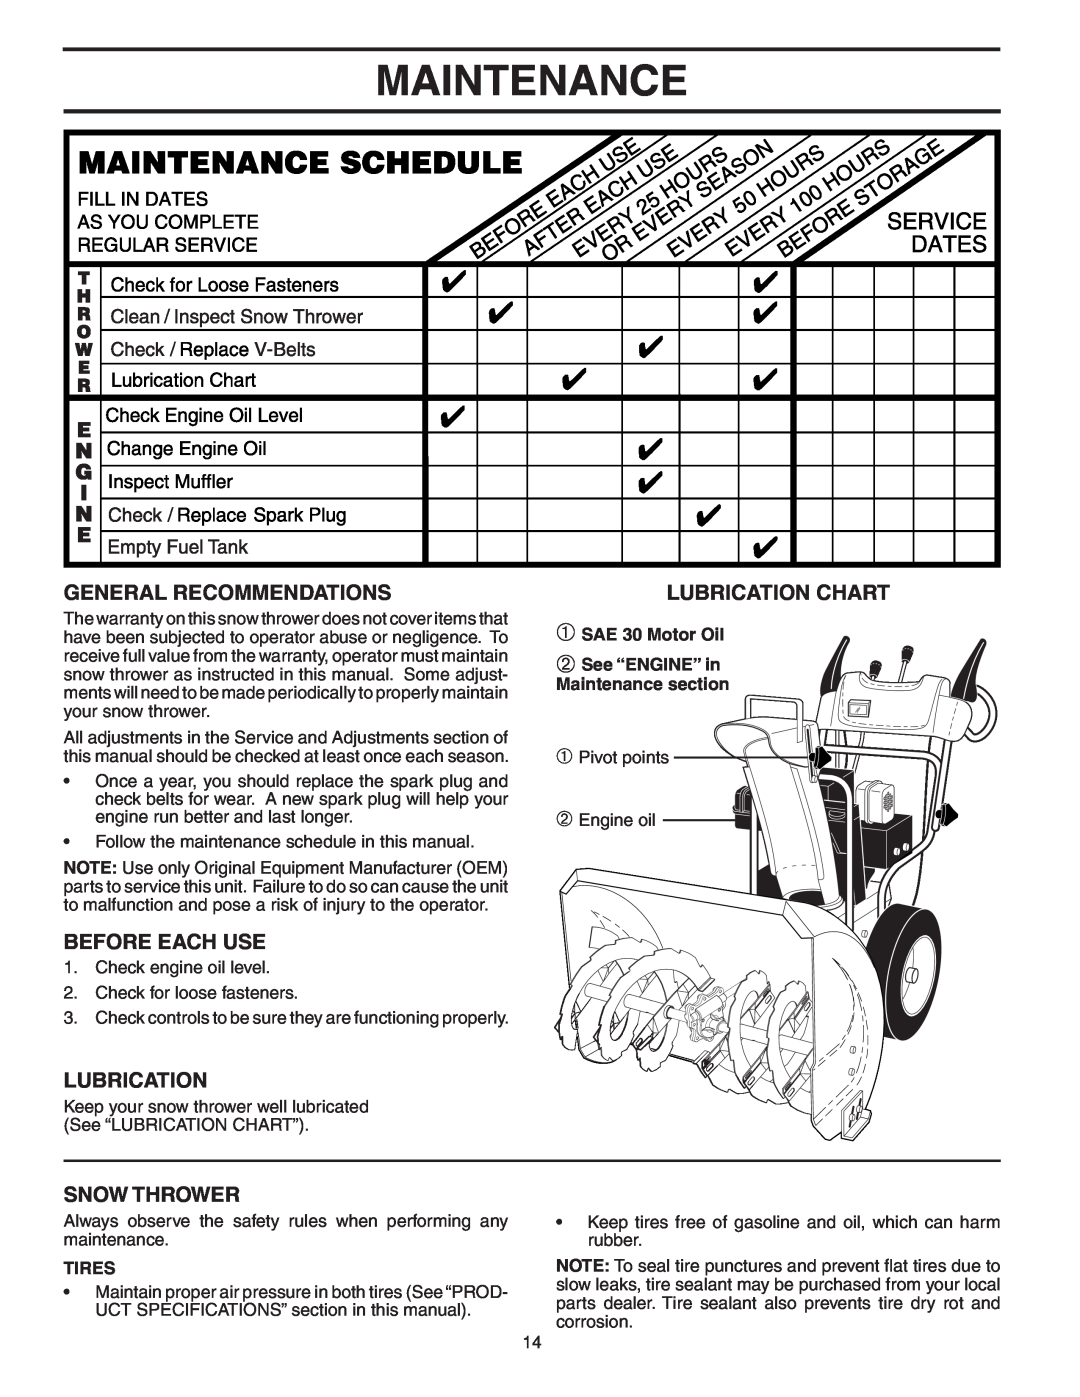 Poulan PP8527ESB Maintenance, General Recommendations, Before Each Use, Snow Thrower, Lubrication Chart, Tires 